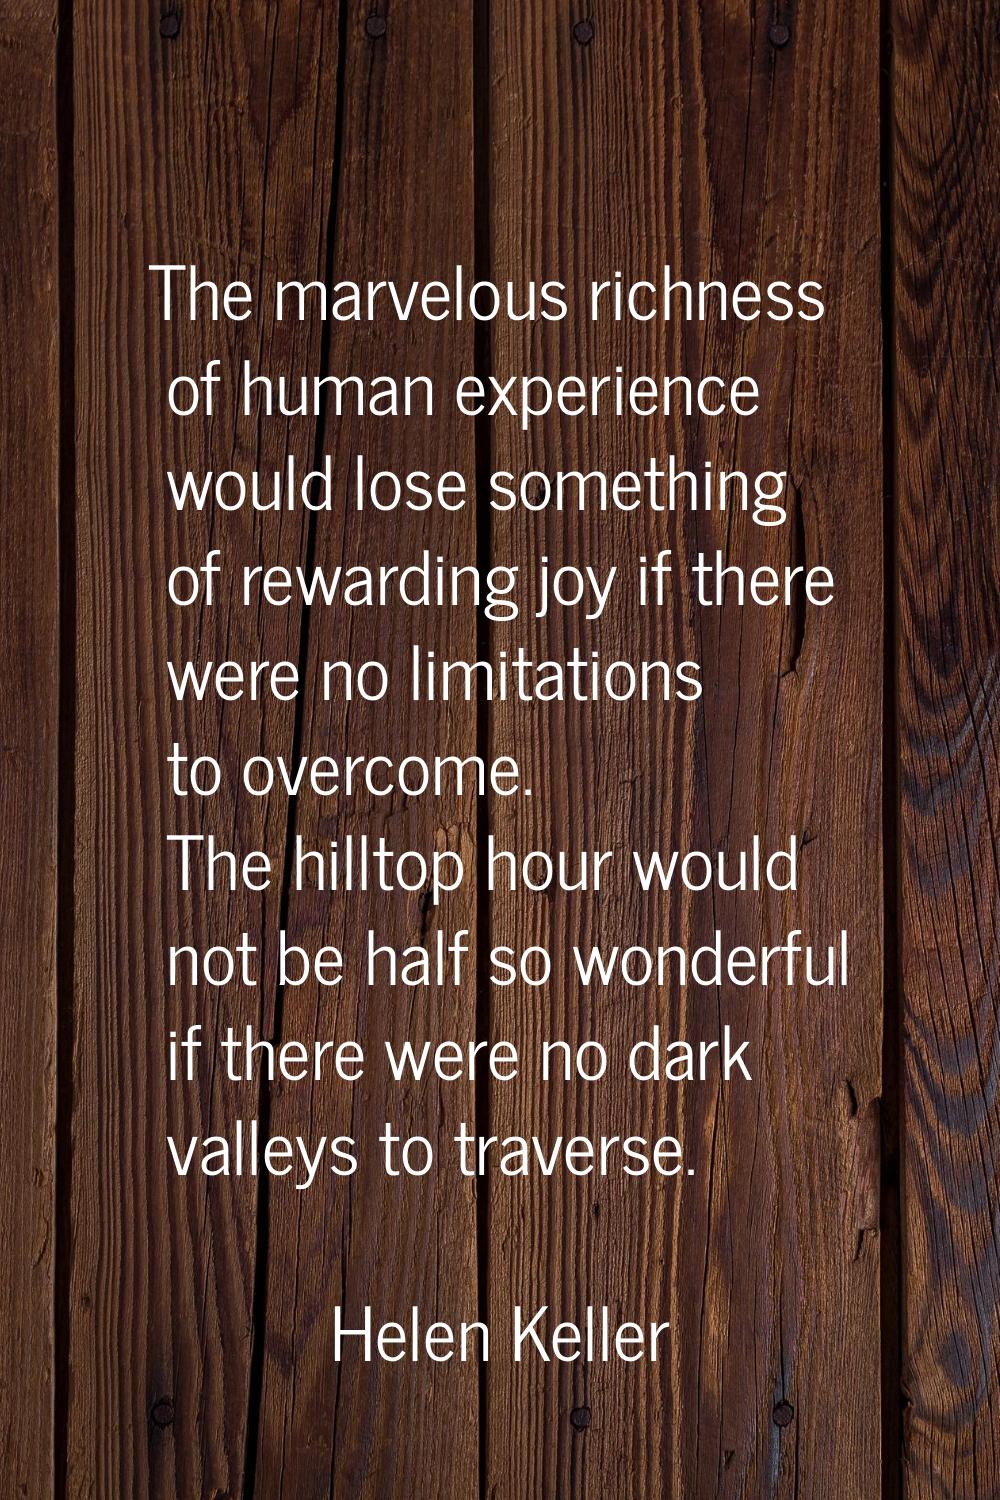 The marvelous richness of human experience would lose something of rewarding joy if there were no l